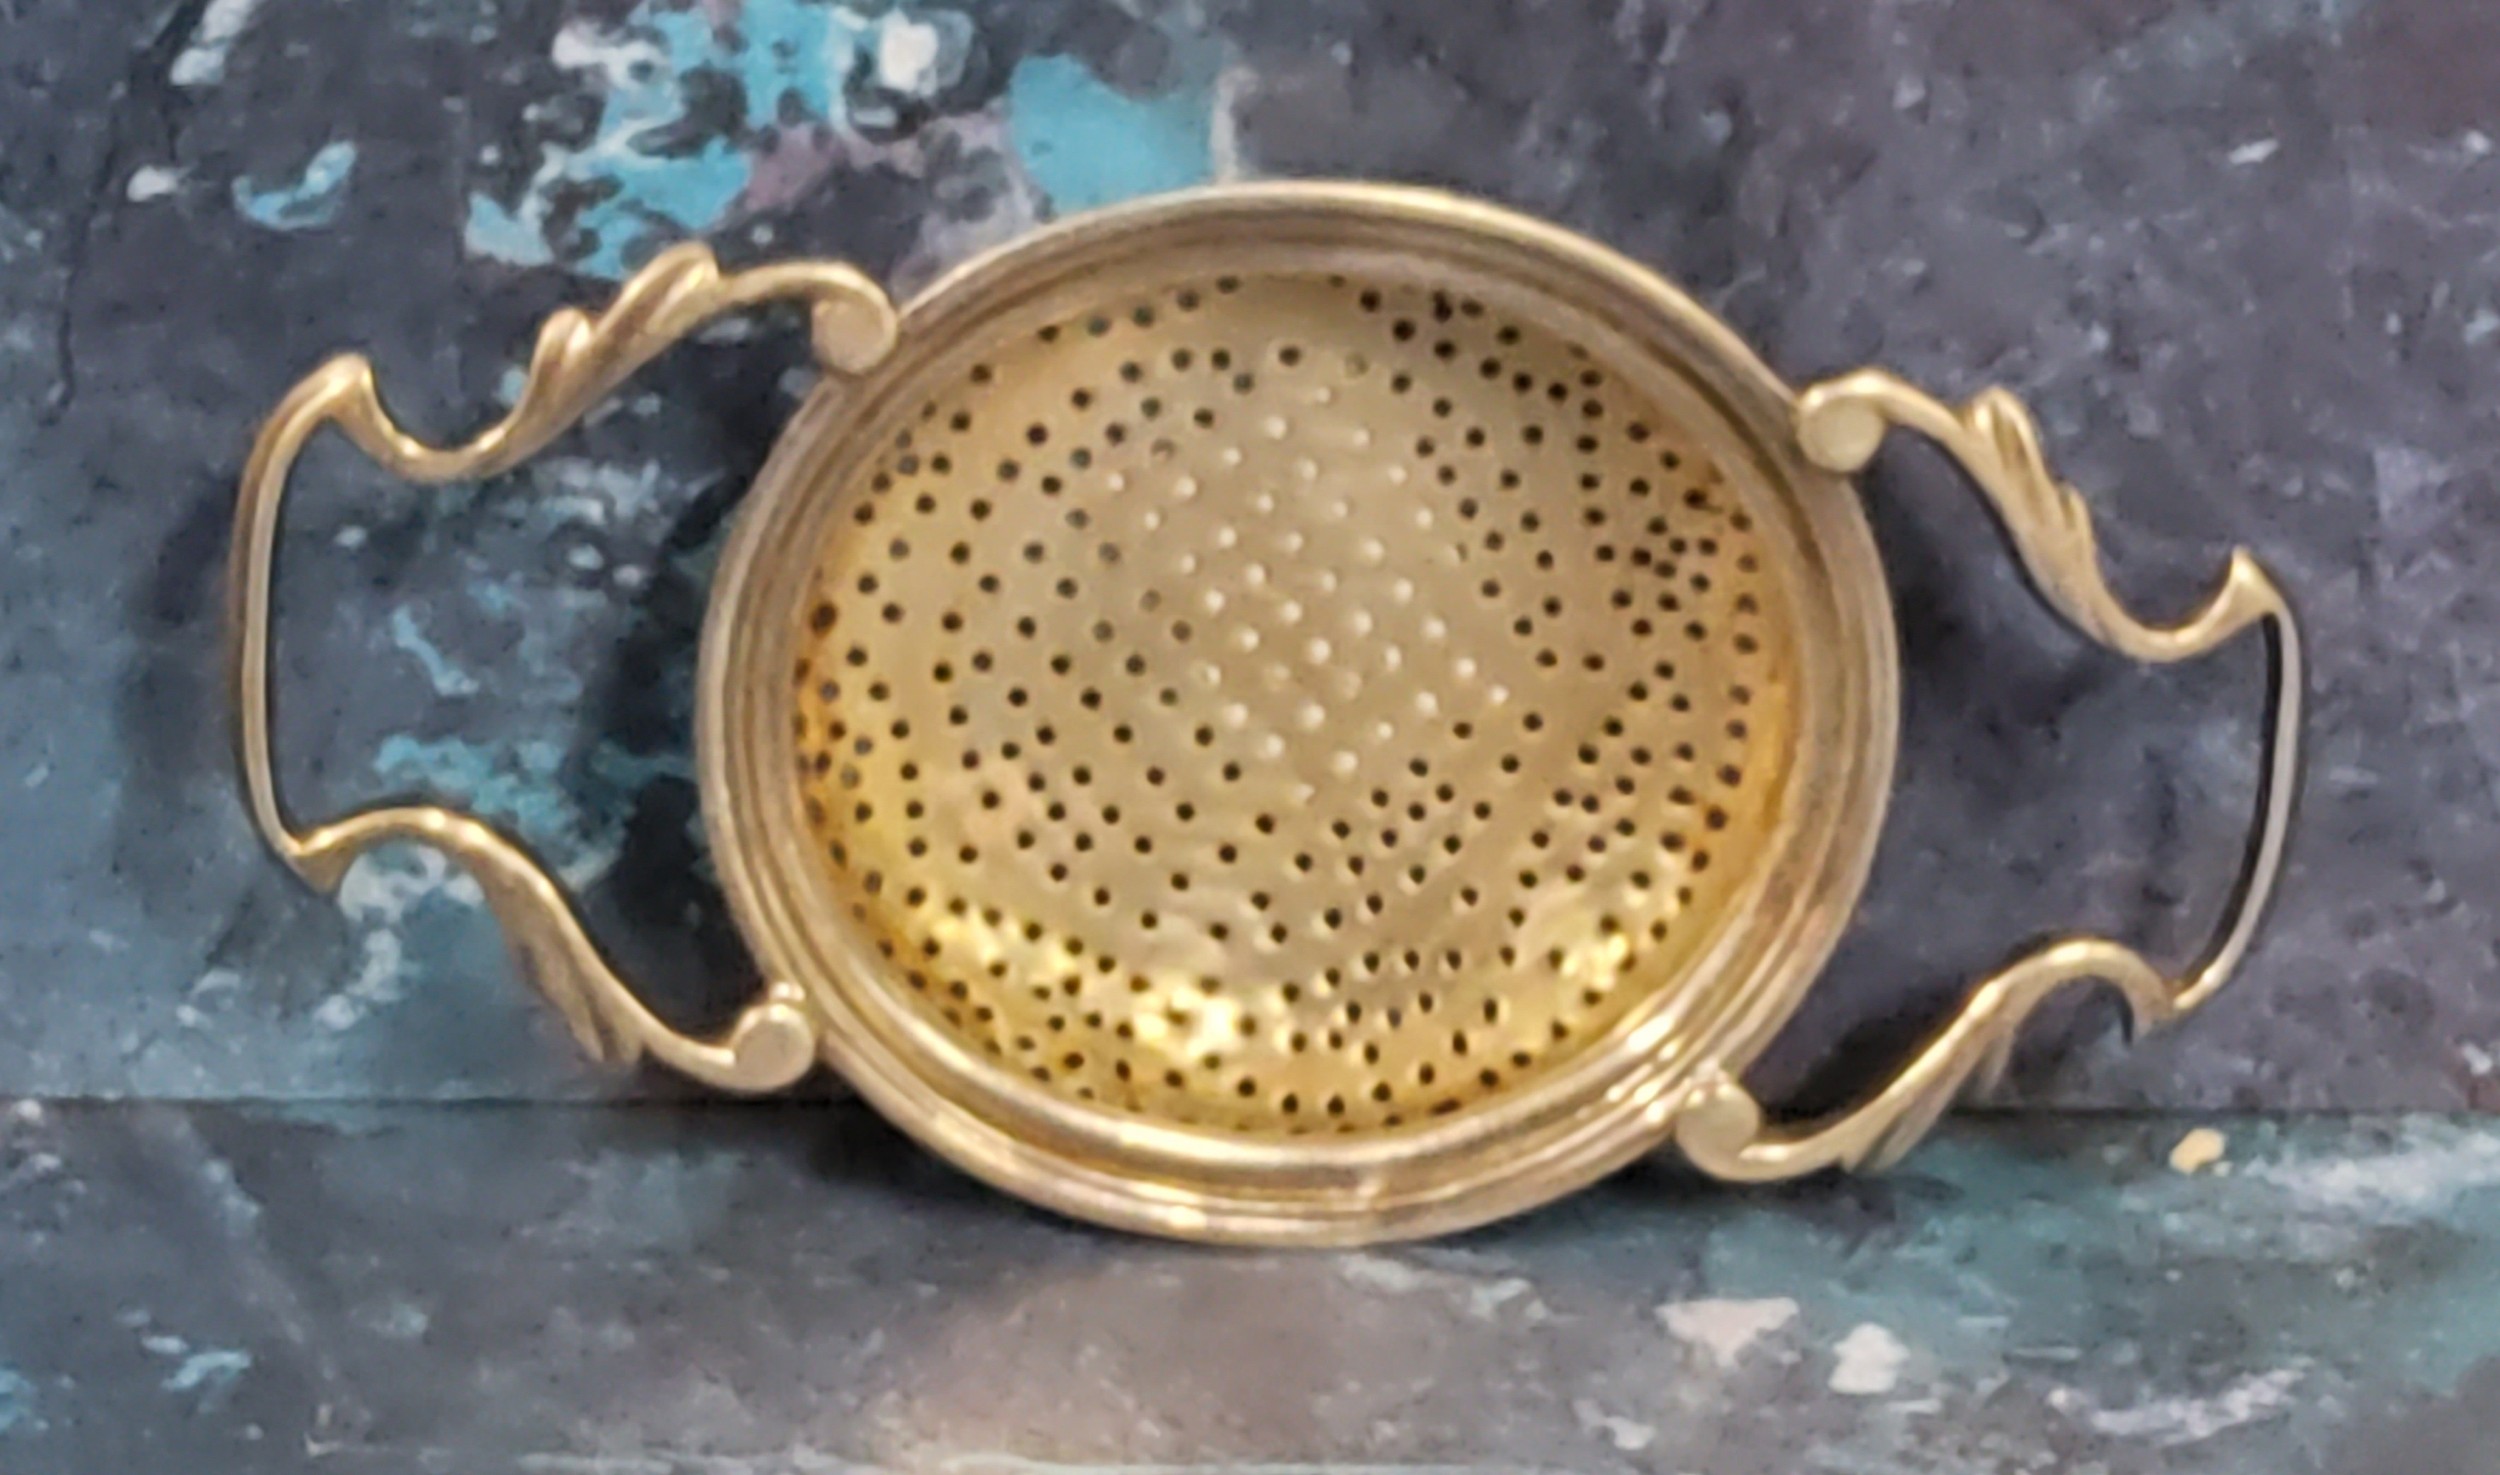 A George III silver lemon strainer, Sheffield rubbed marks, c.1820, 1.2toz